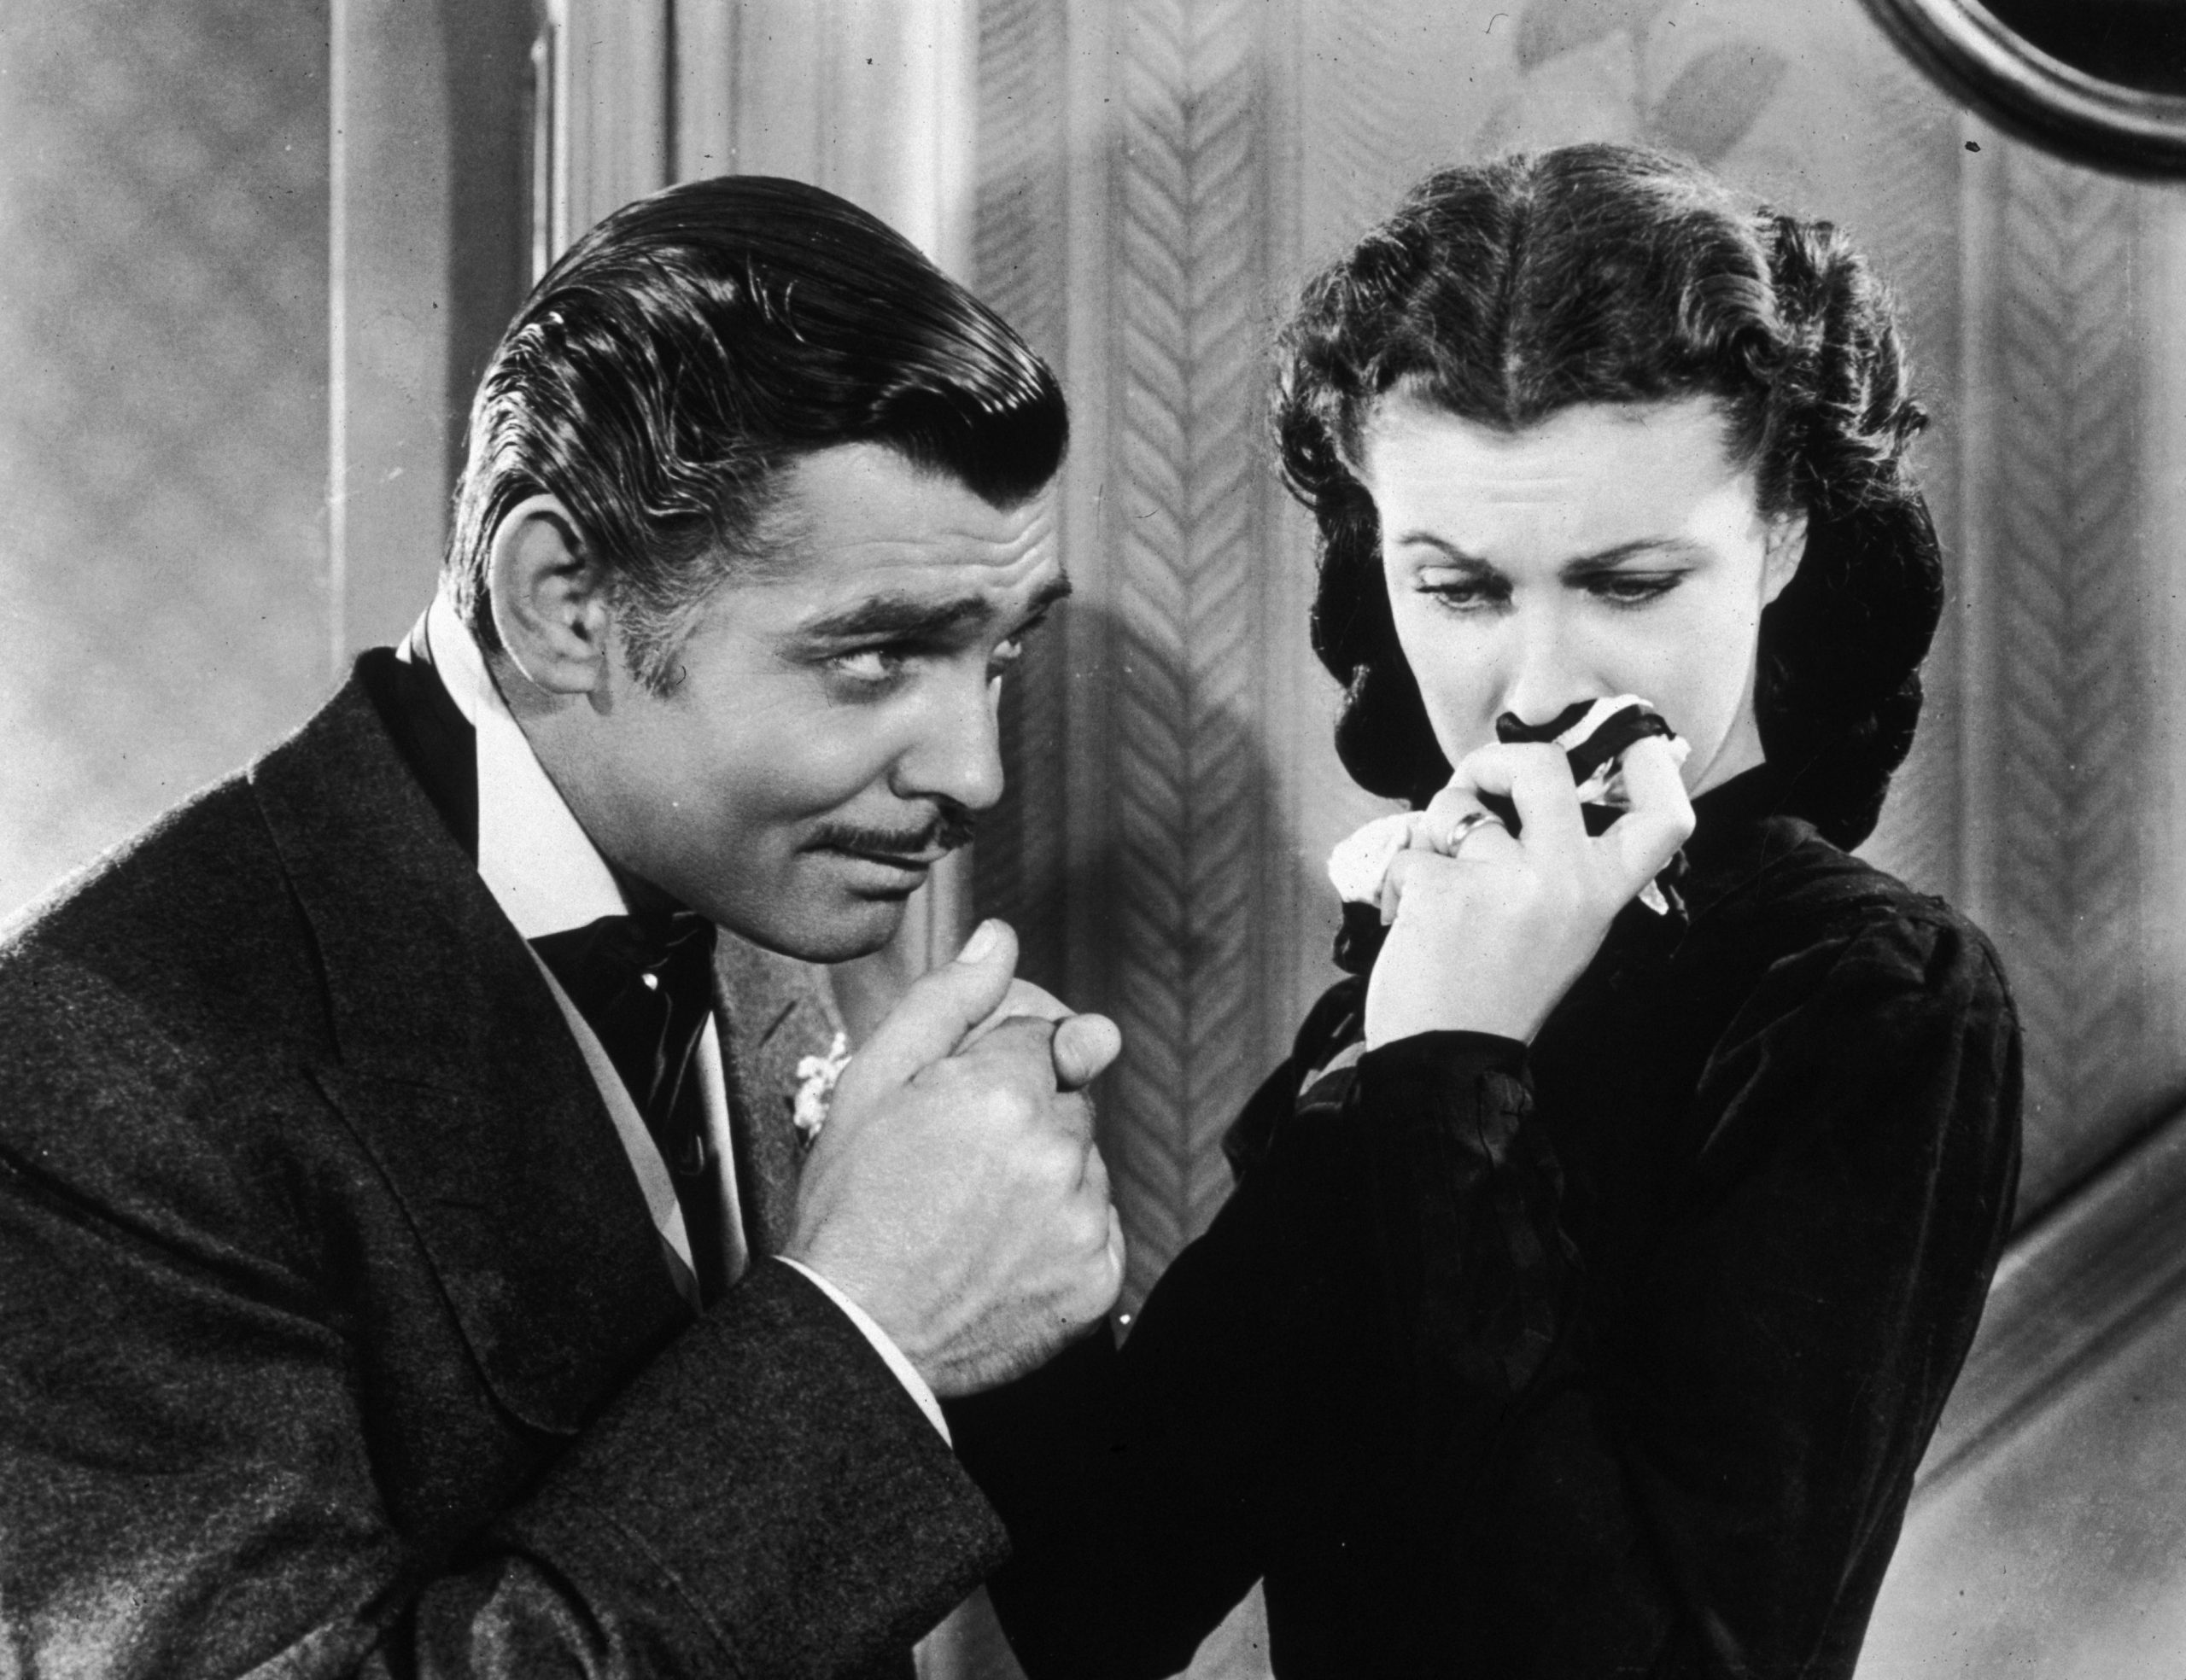 Actor Clarke Gable (left) holds actress Viven Leigh's hand in the film "Gone with the Wind" in 1930.